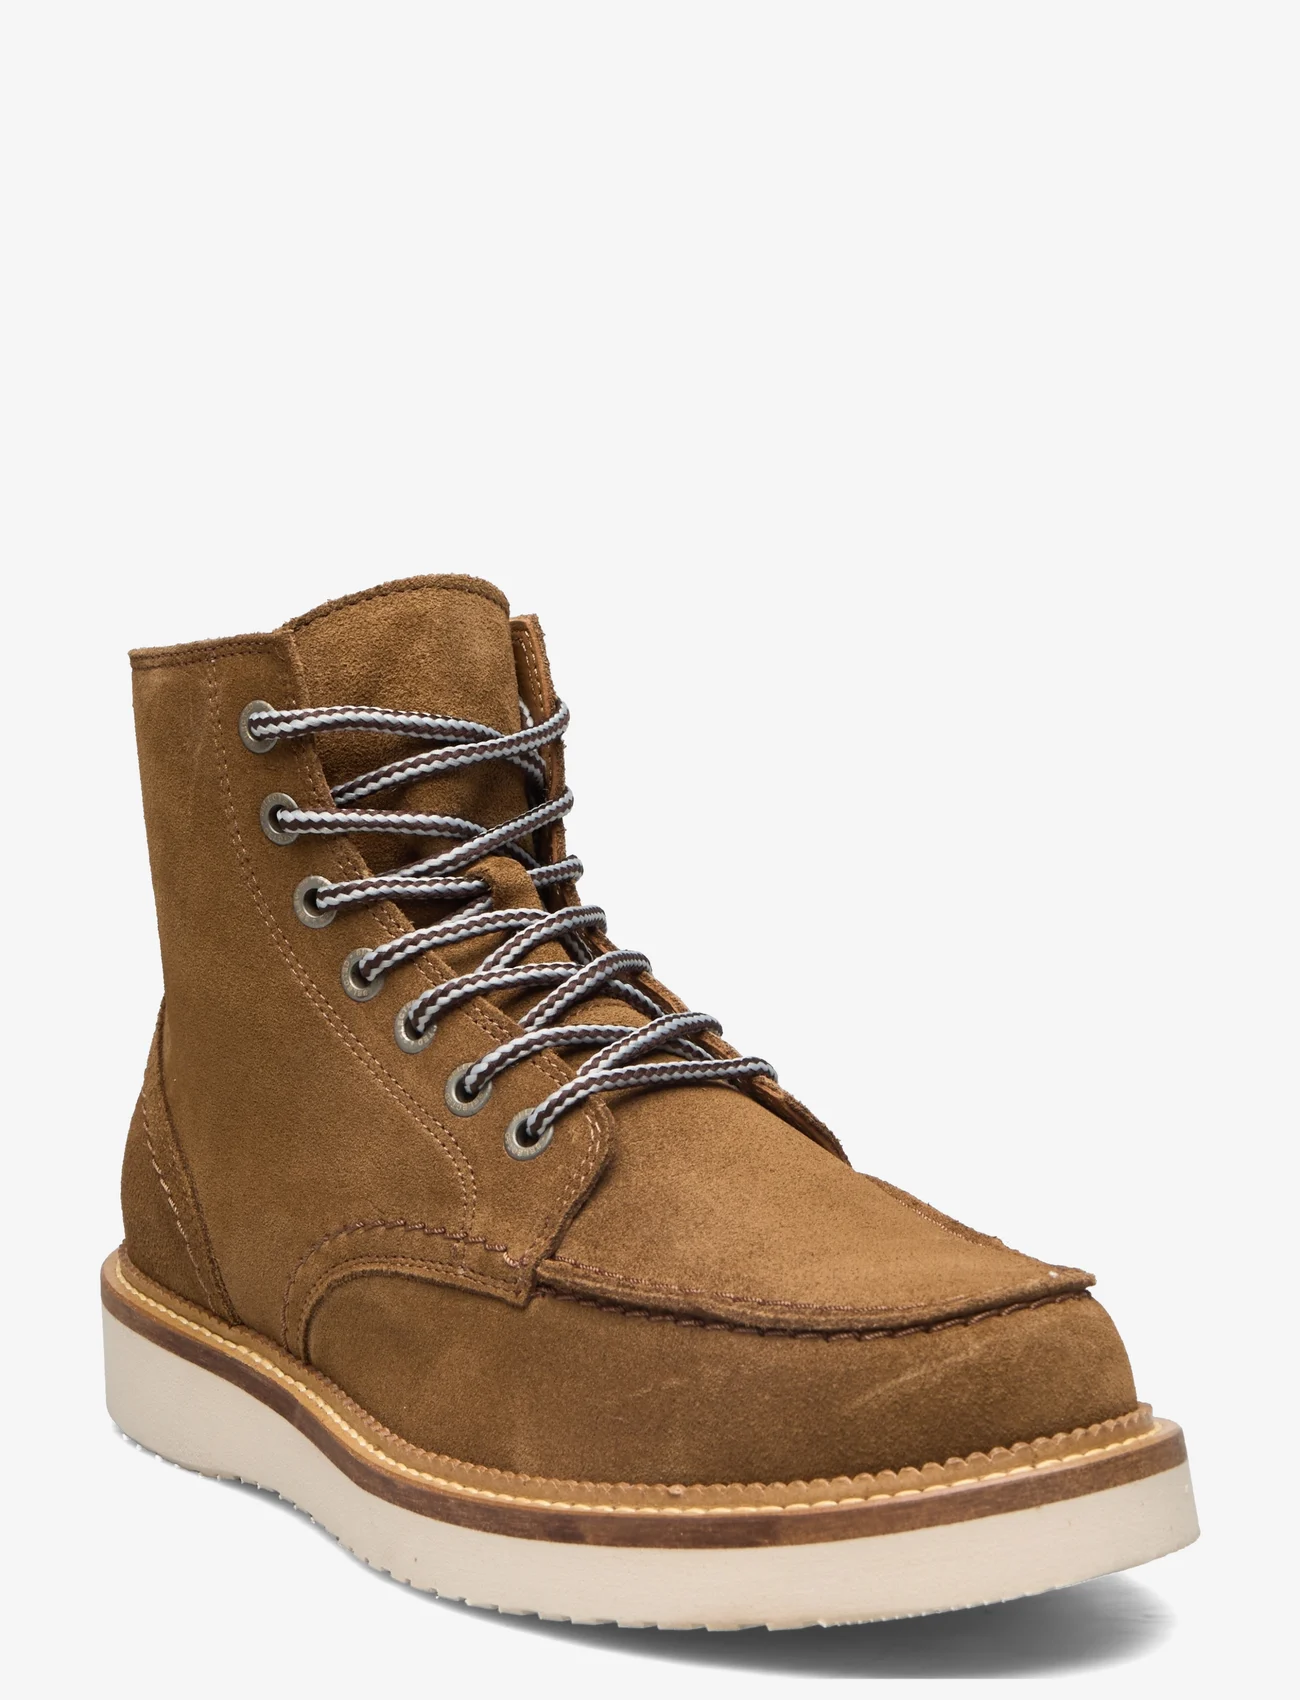 Selected Homme - SLHTEO NEW SUEDE MOC-TOE BOOT B - suvarstomieji batai - tobacco brown - 0